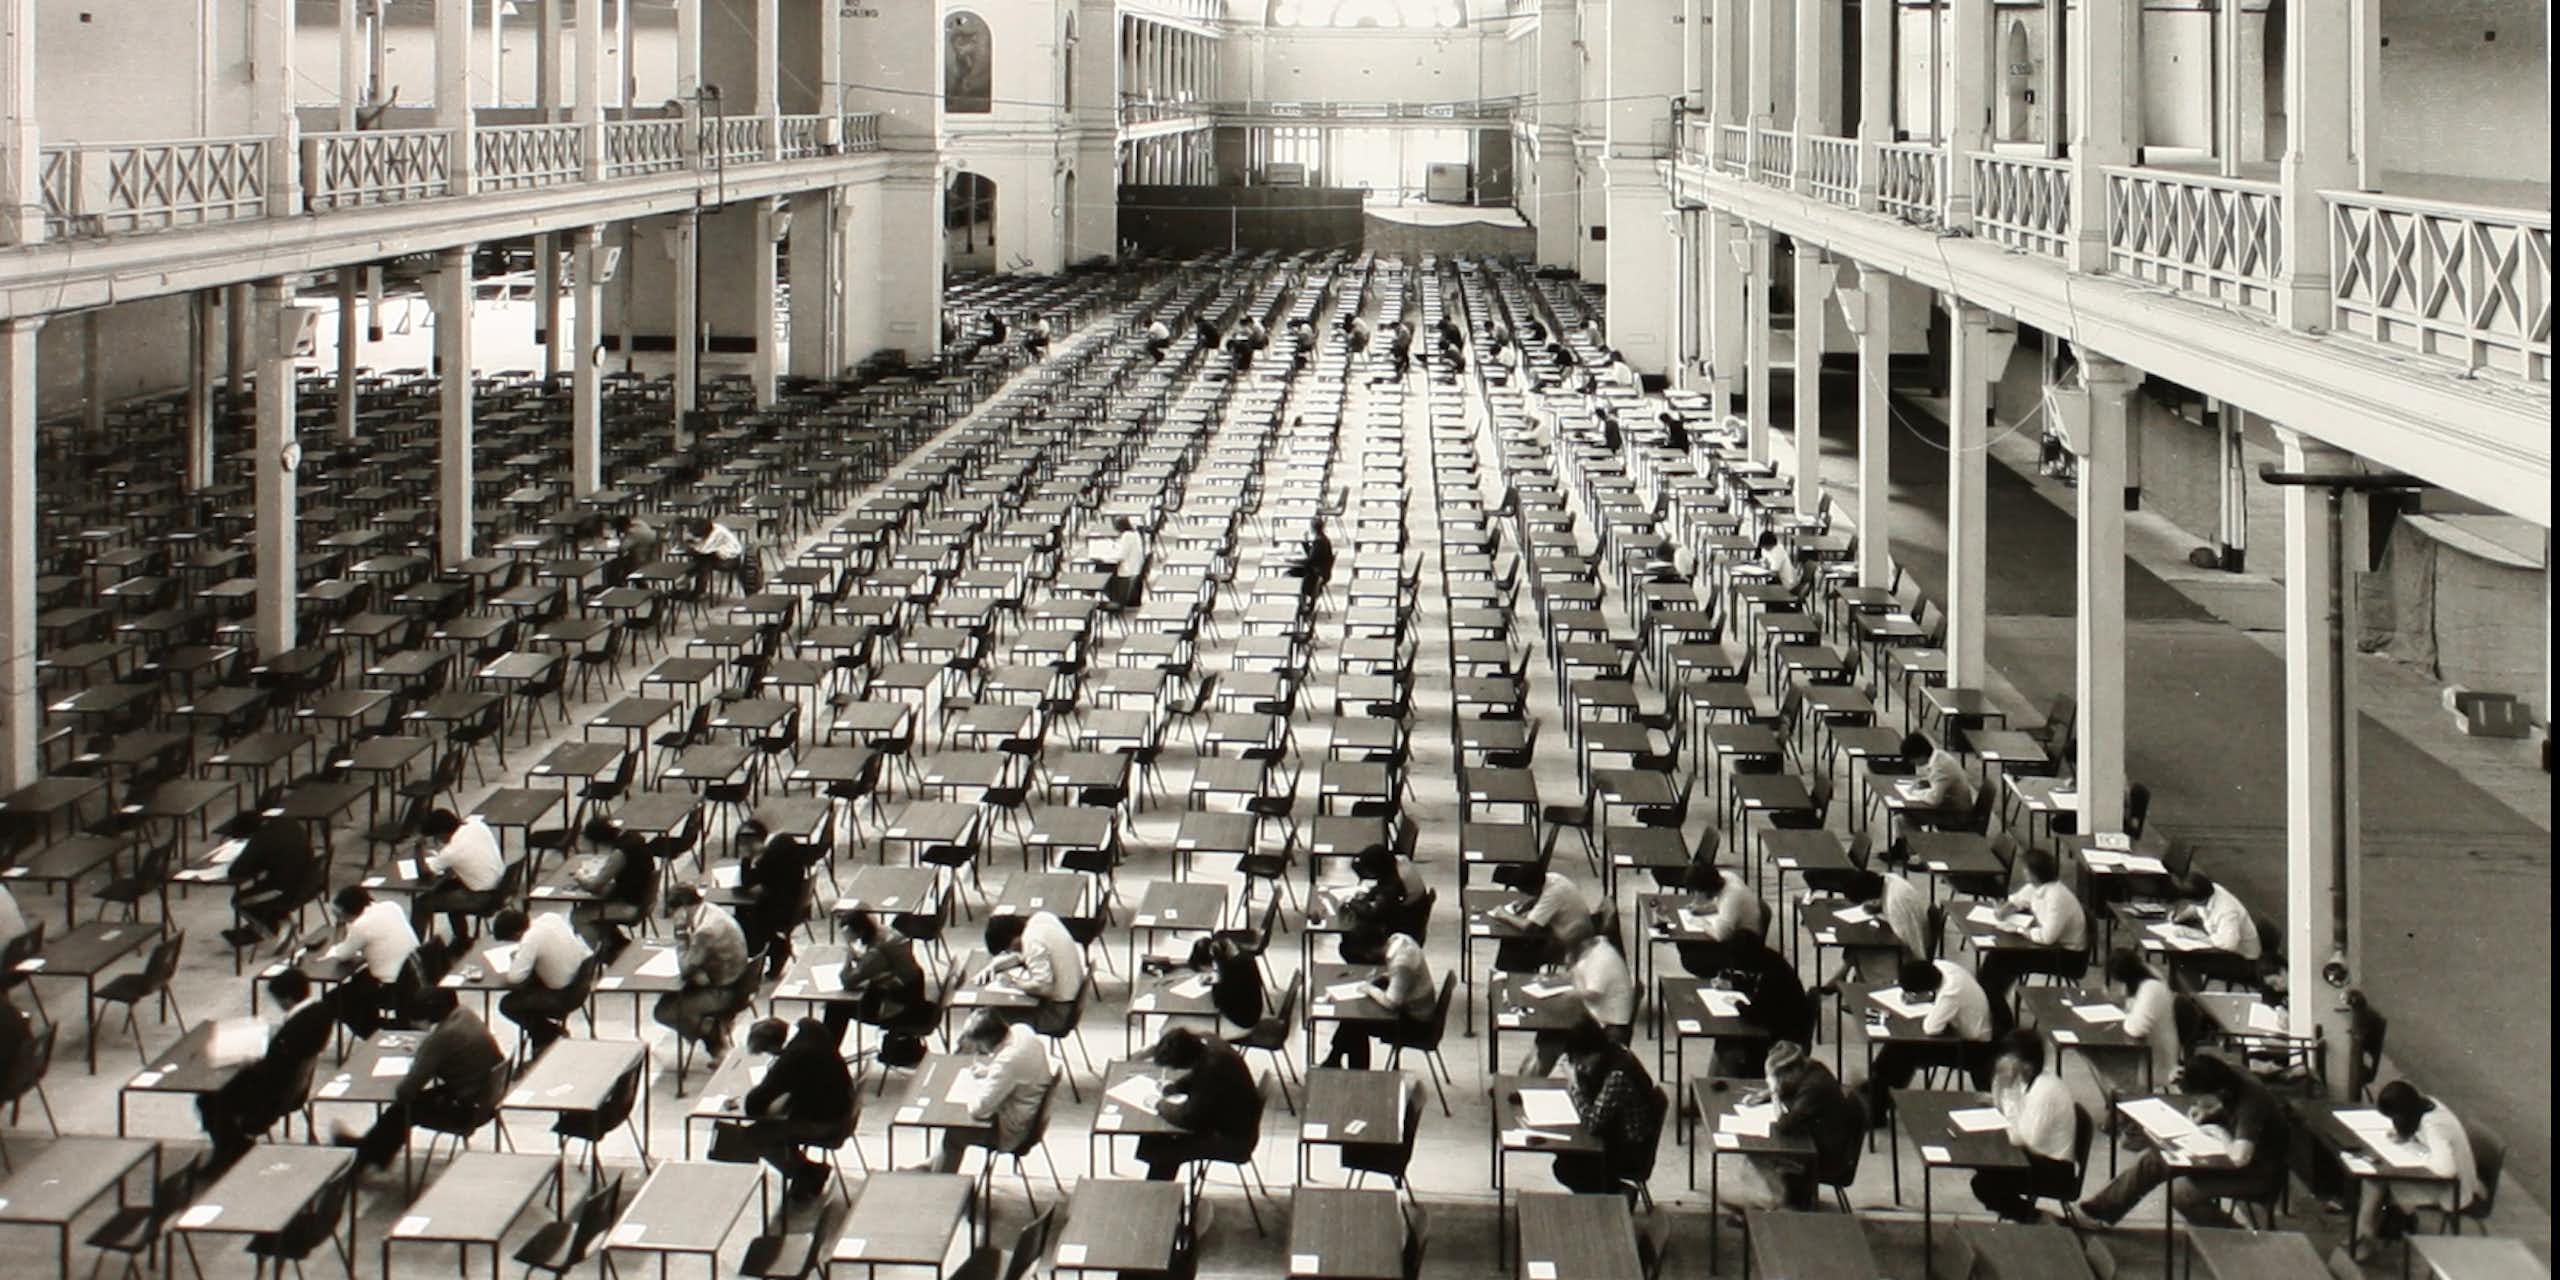 Large room with rows of tables and chairs for an examination